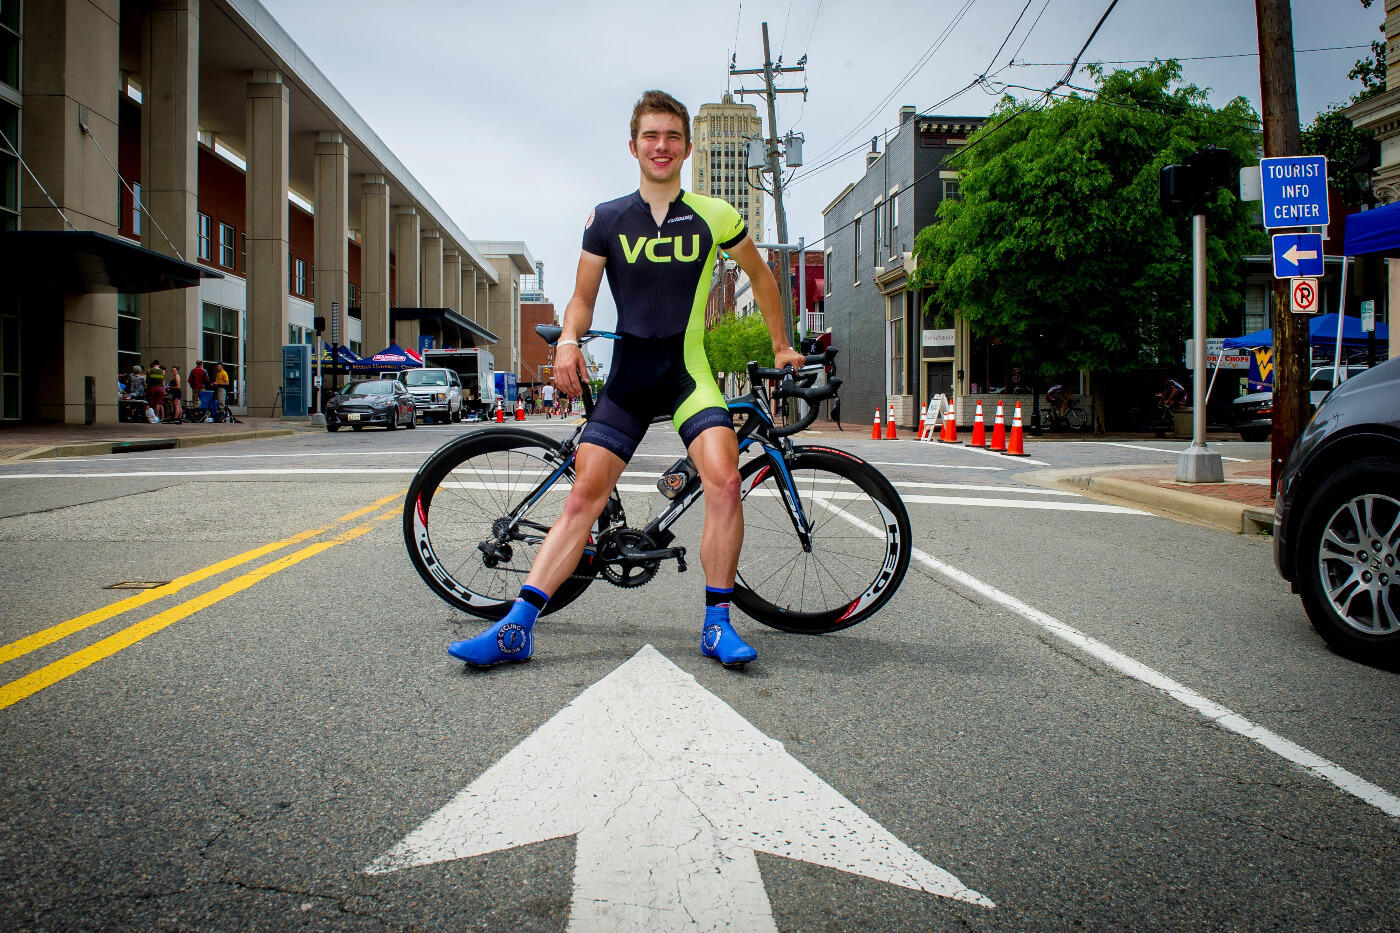 Chris Jones, VCU student and winner of the men’s individual time trial at the the 2014 USA Cycling Collegiate Road National Championships.